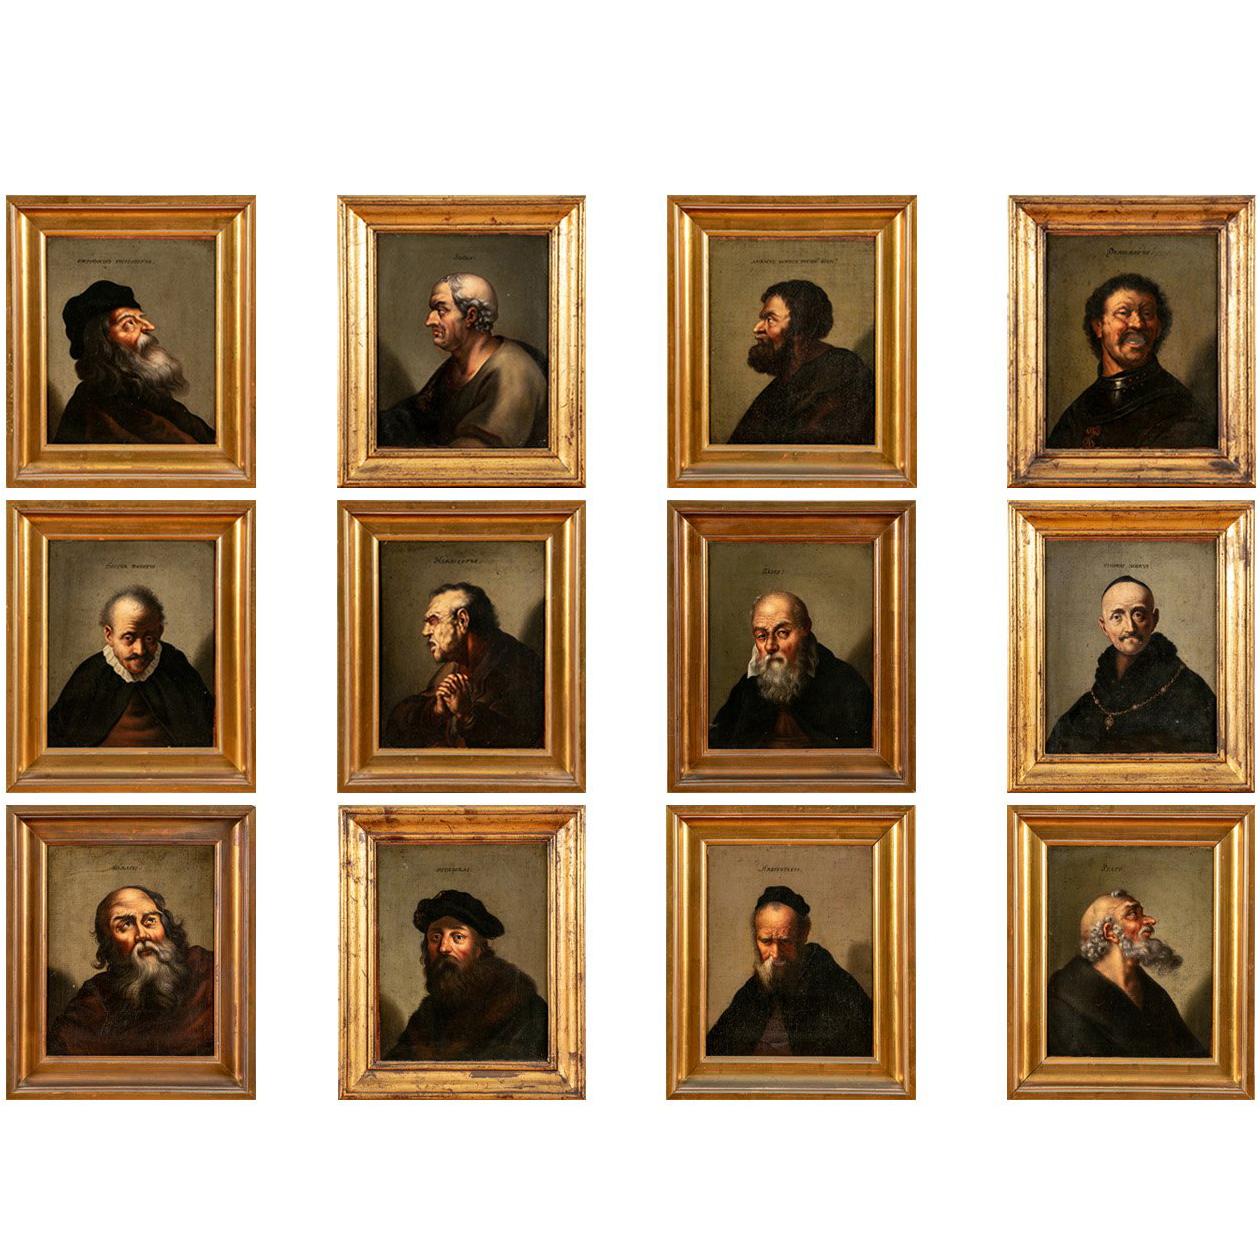 Series of 12 Antique Painted Portraits of Historic Figures